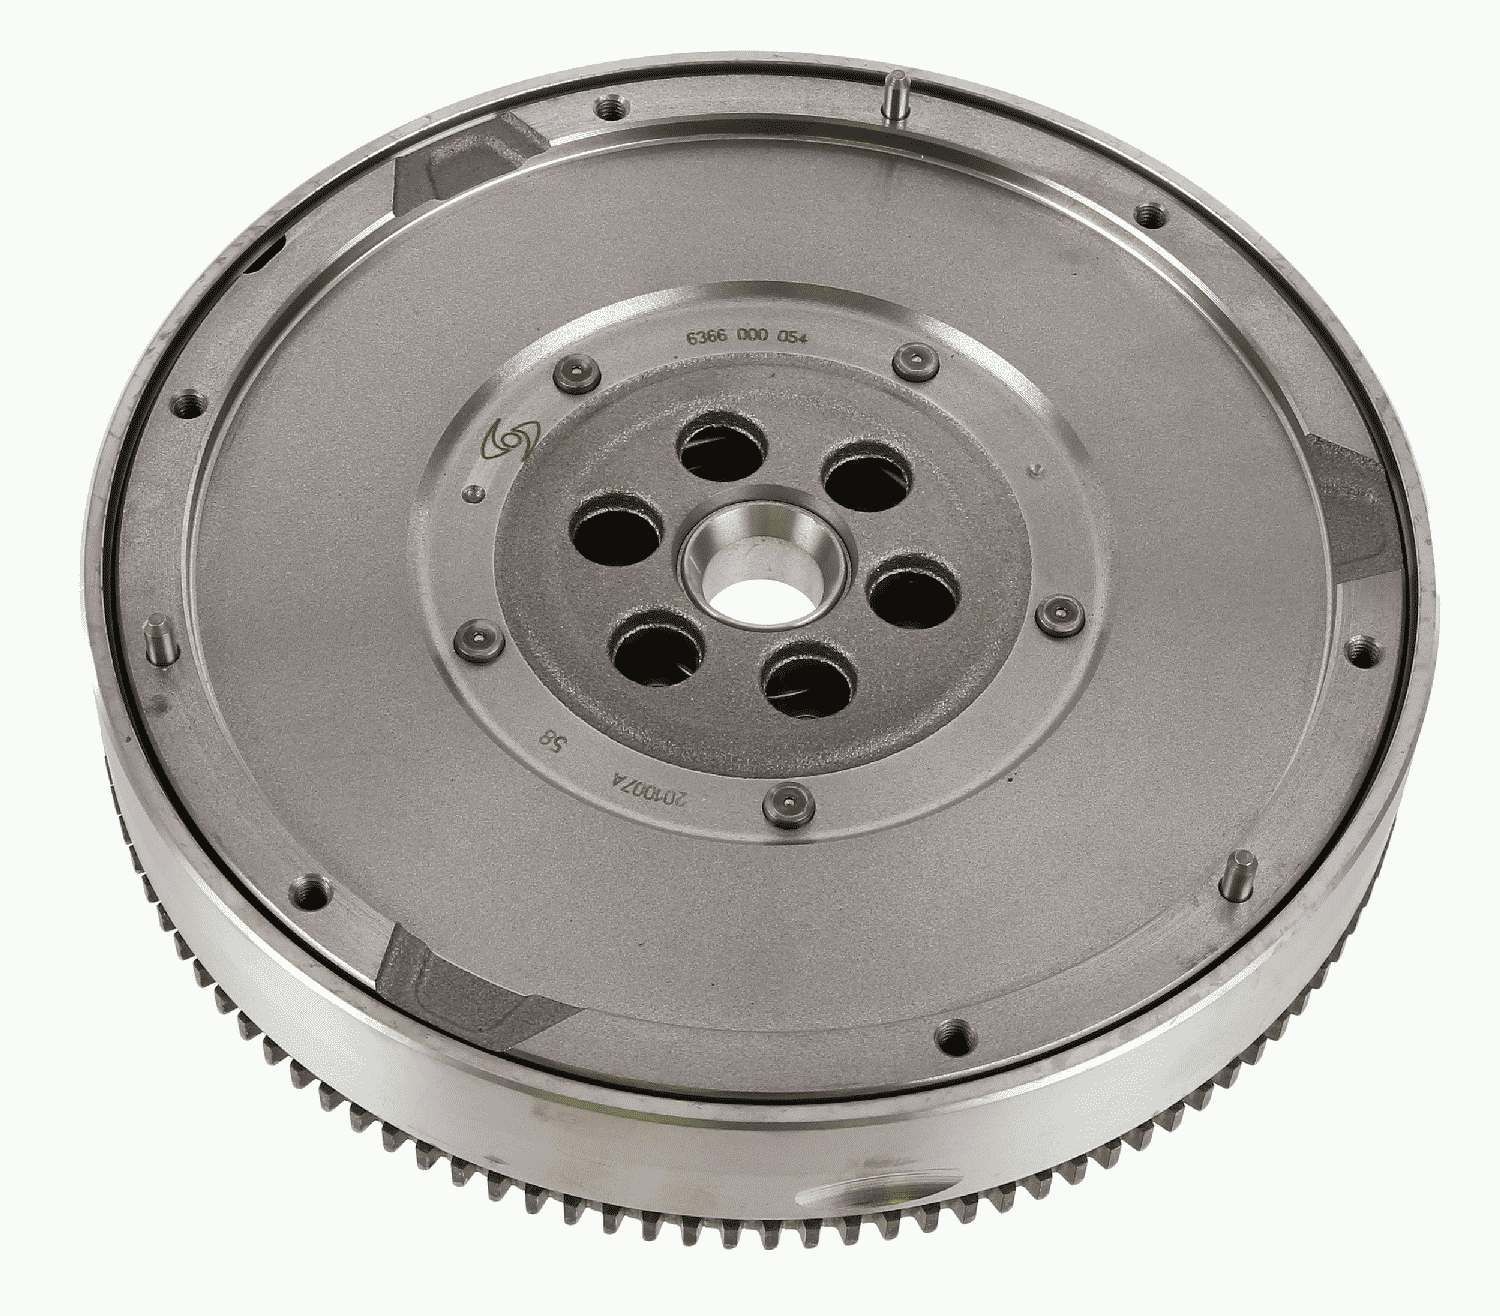 Dual flywheel clutch 6366000054 Ford FOCUS 1999 – buy replacement parts